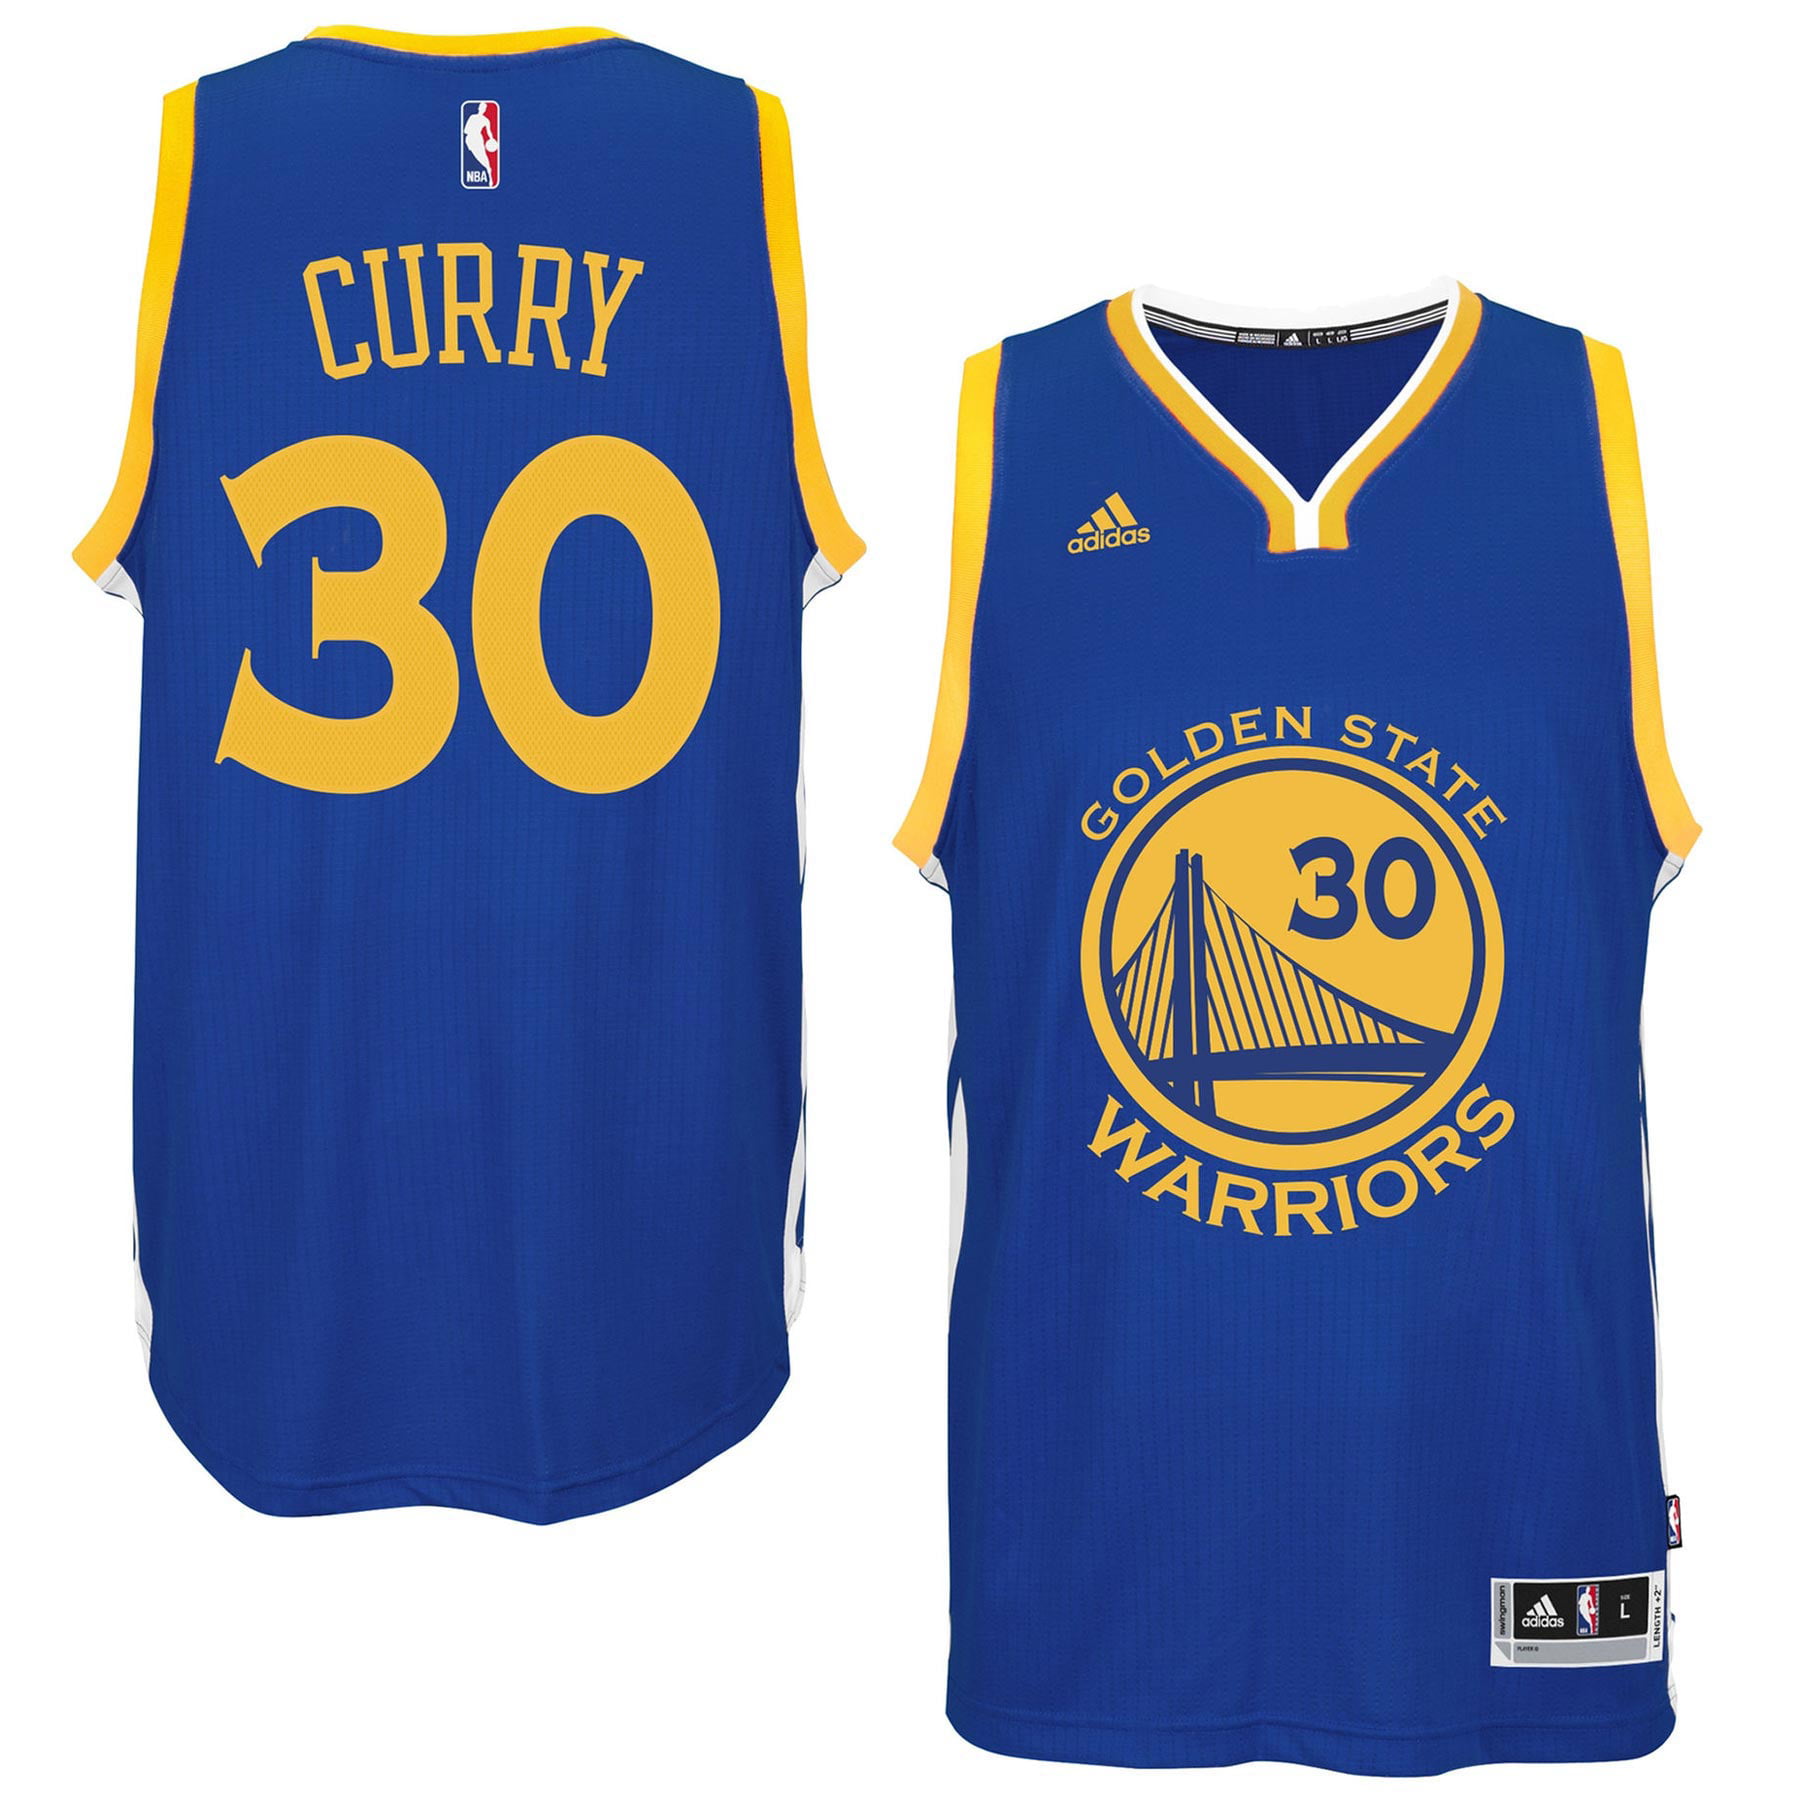 stephen curry jersey 2015